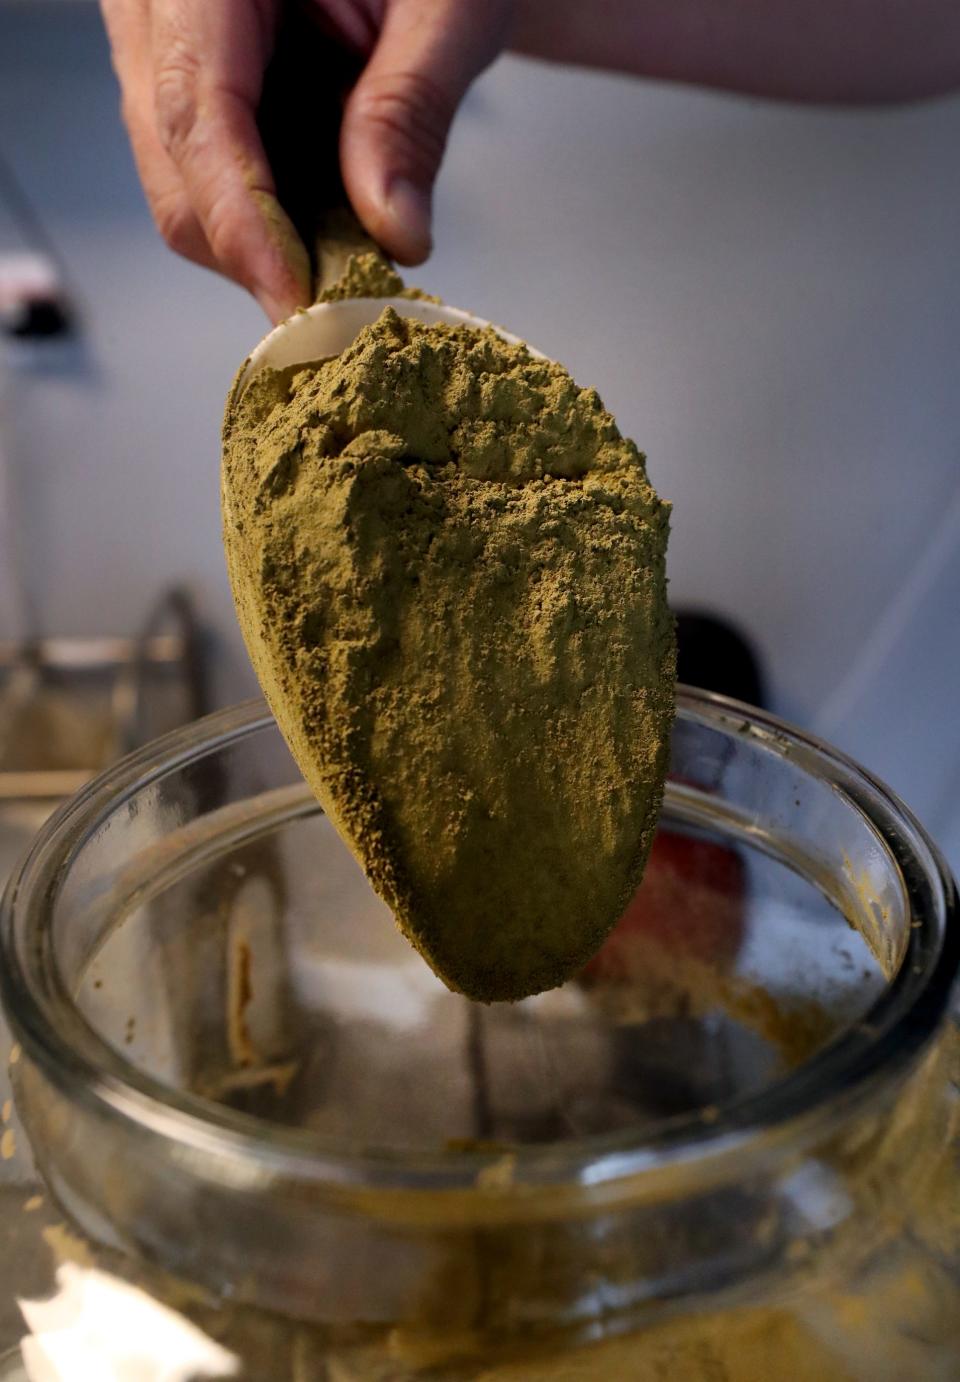 Kratom is a naturally occurring herbal extract that comes from leaves of an evergreen grown in Southeast Asia.